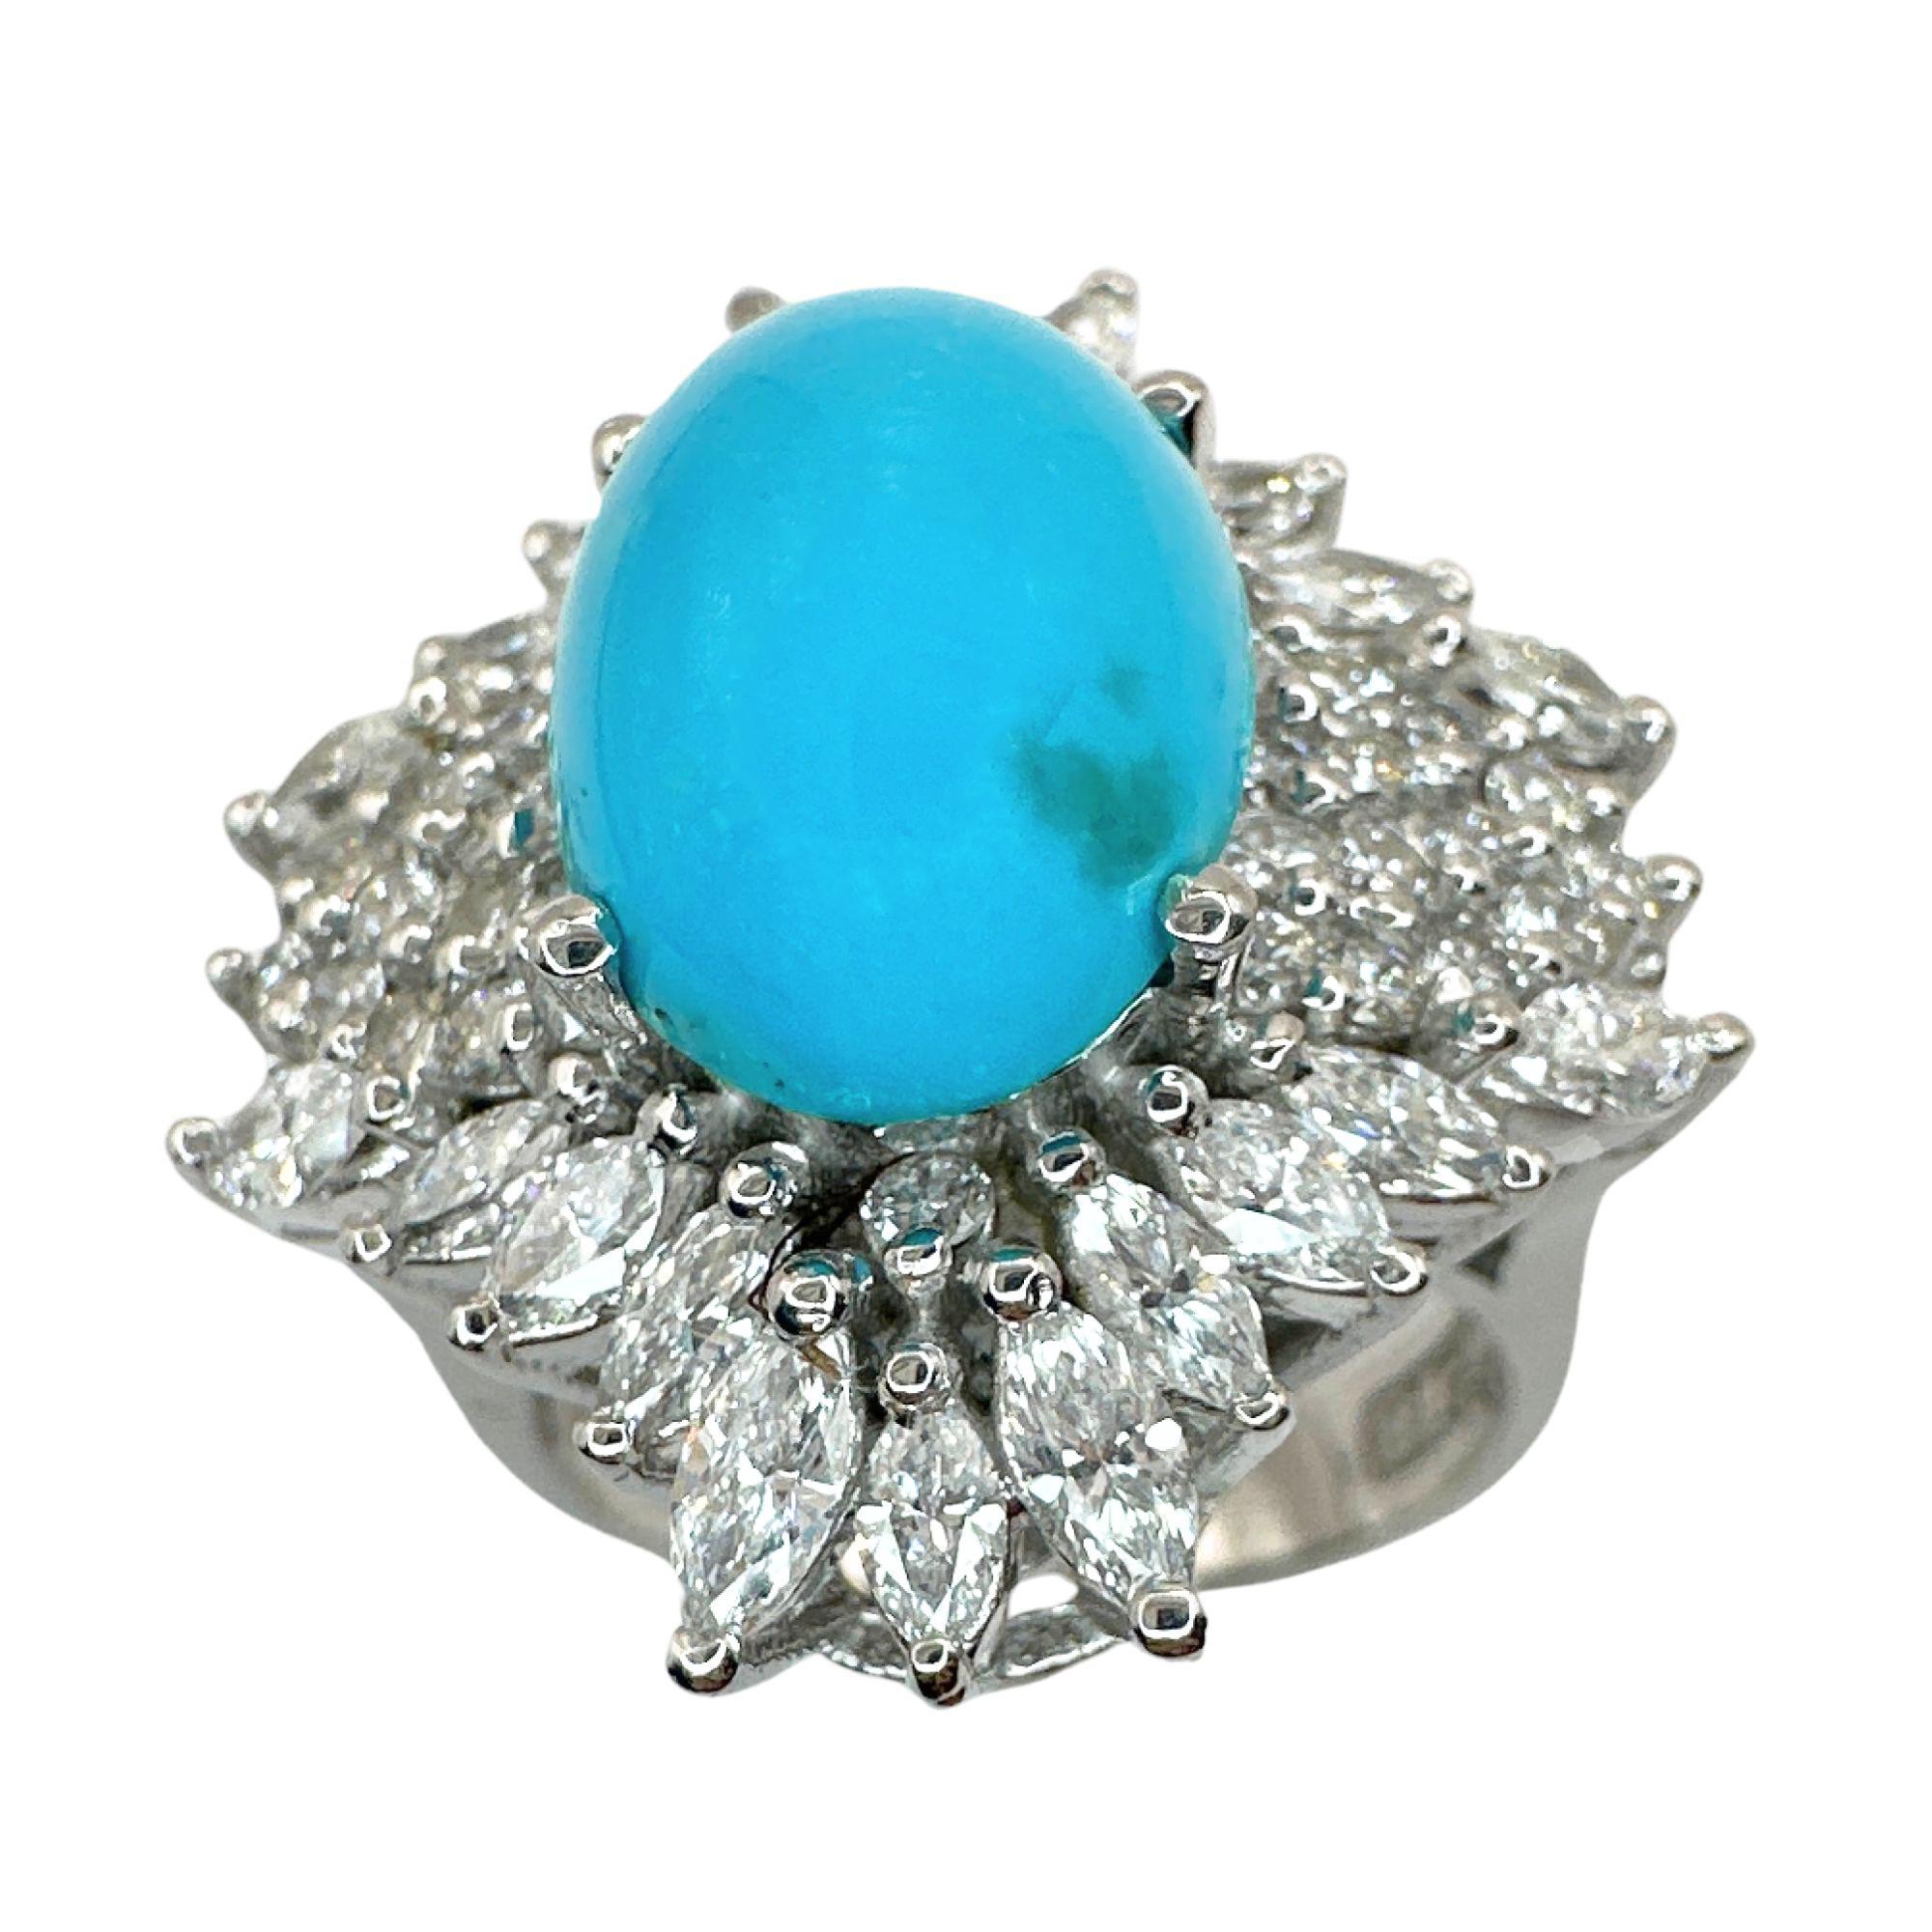 Exude elegance with this stunning 18k diamond and turquoise ring. Crafted in 18k white gold, it features a total of 1.76 carats of diamonds and a 6.40 carat turquoise center. In good condition with minor surface wear suitable for its age, this ring